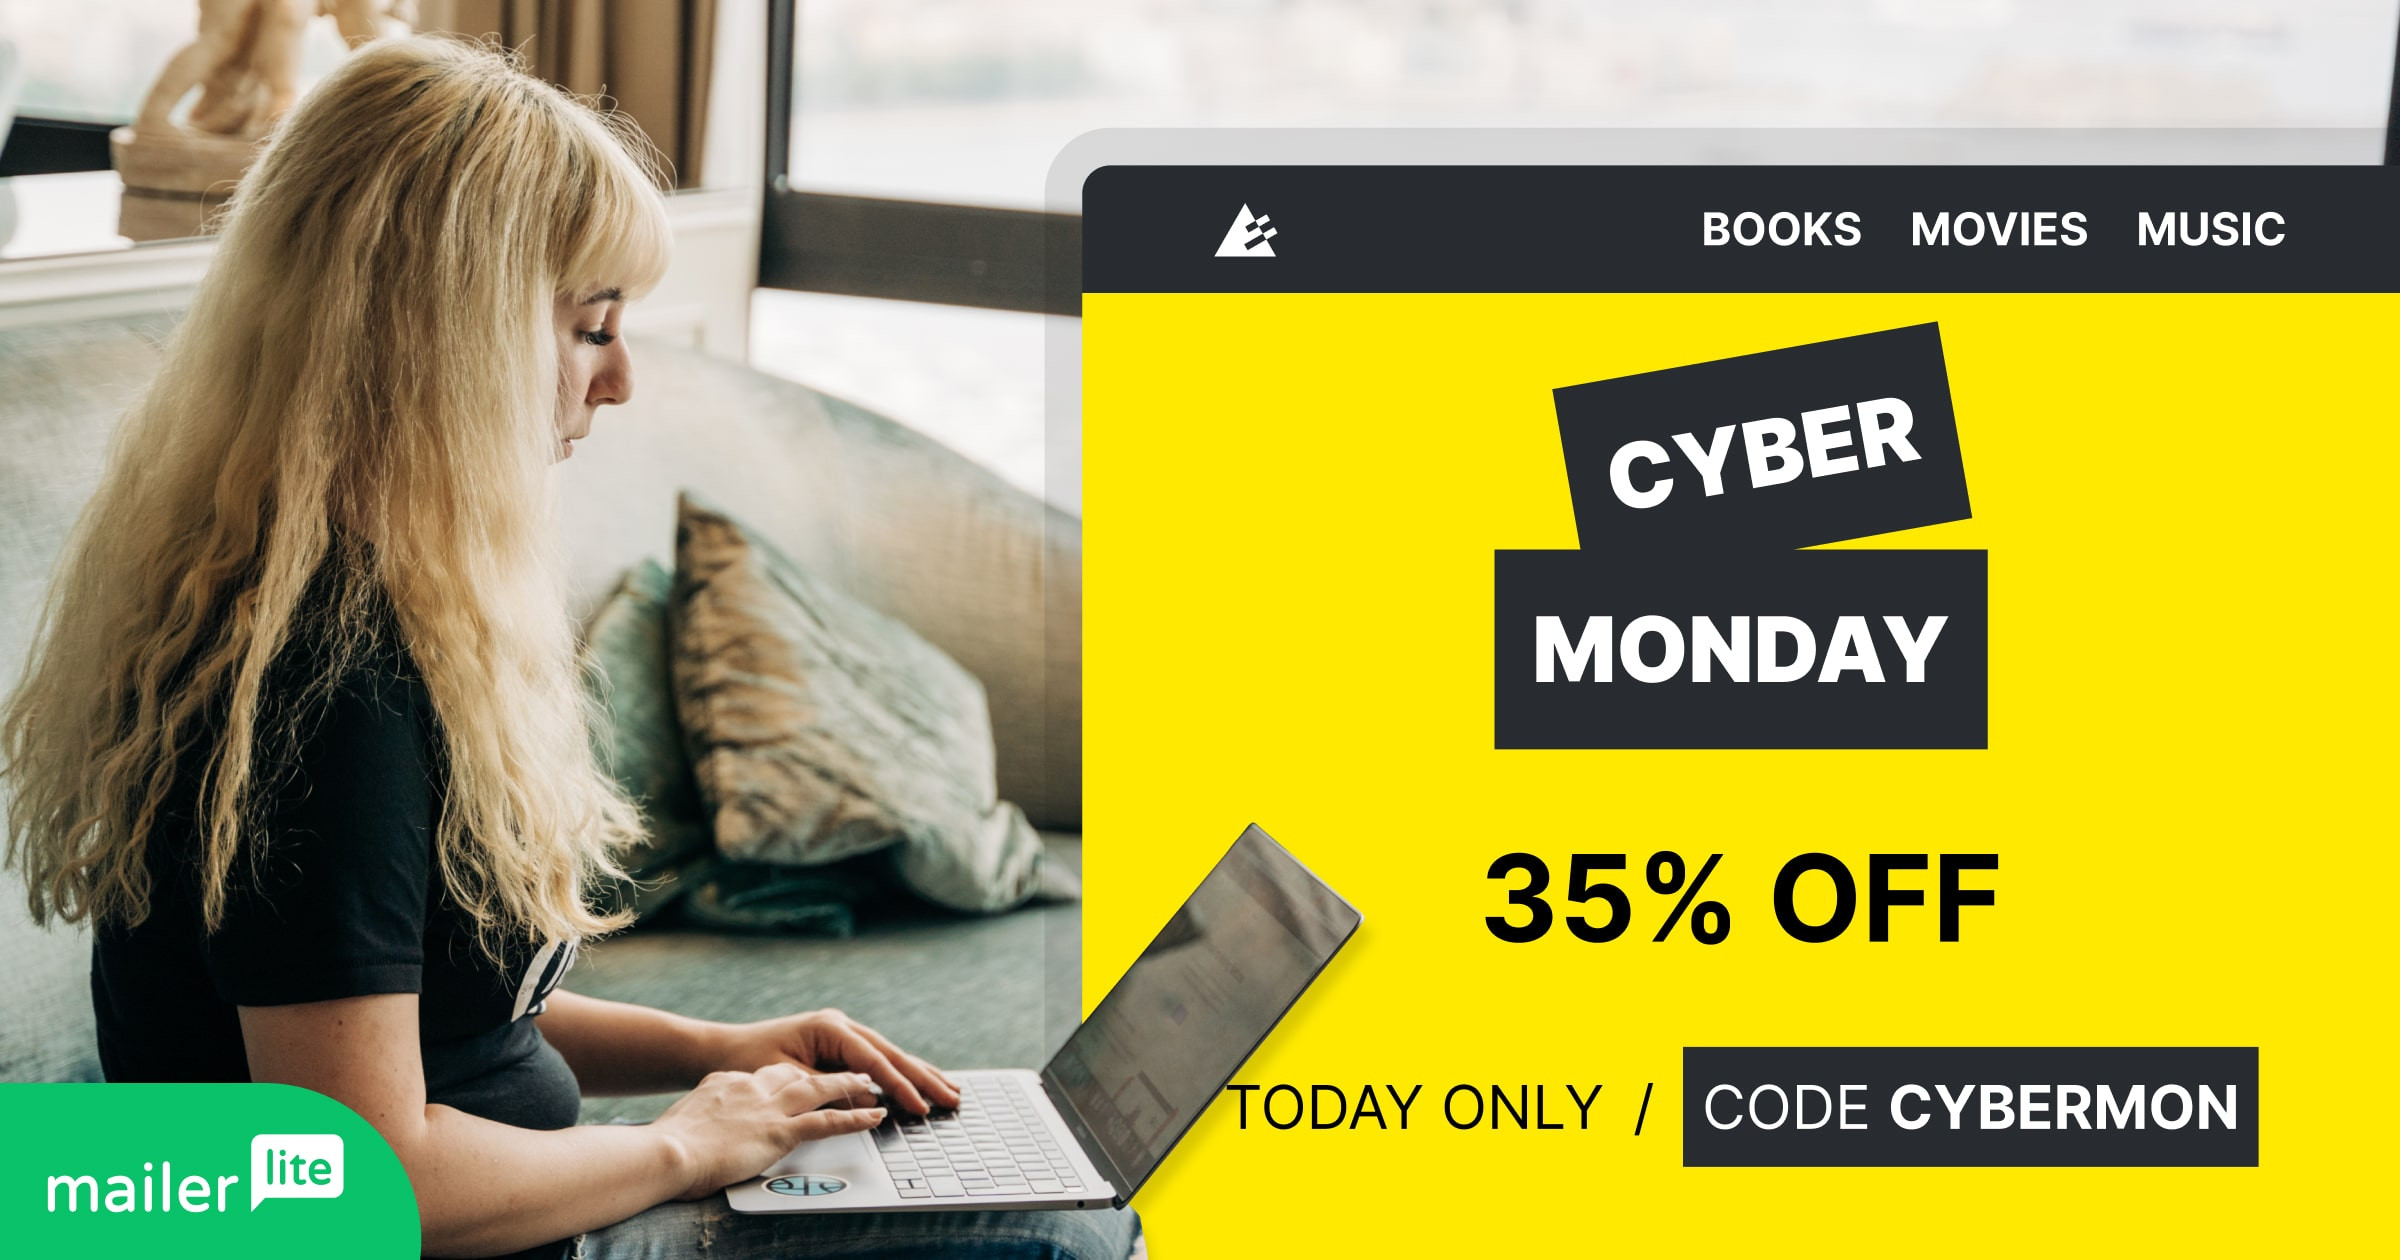 14 deals on holiday hosting essentials during Cyber Monday